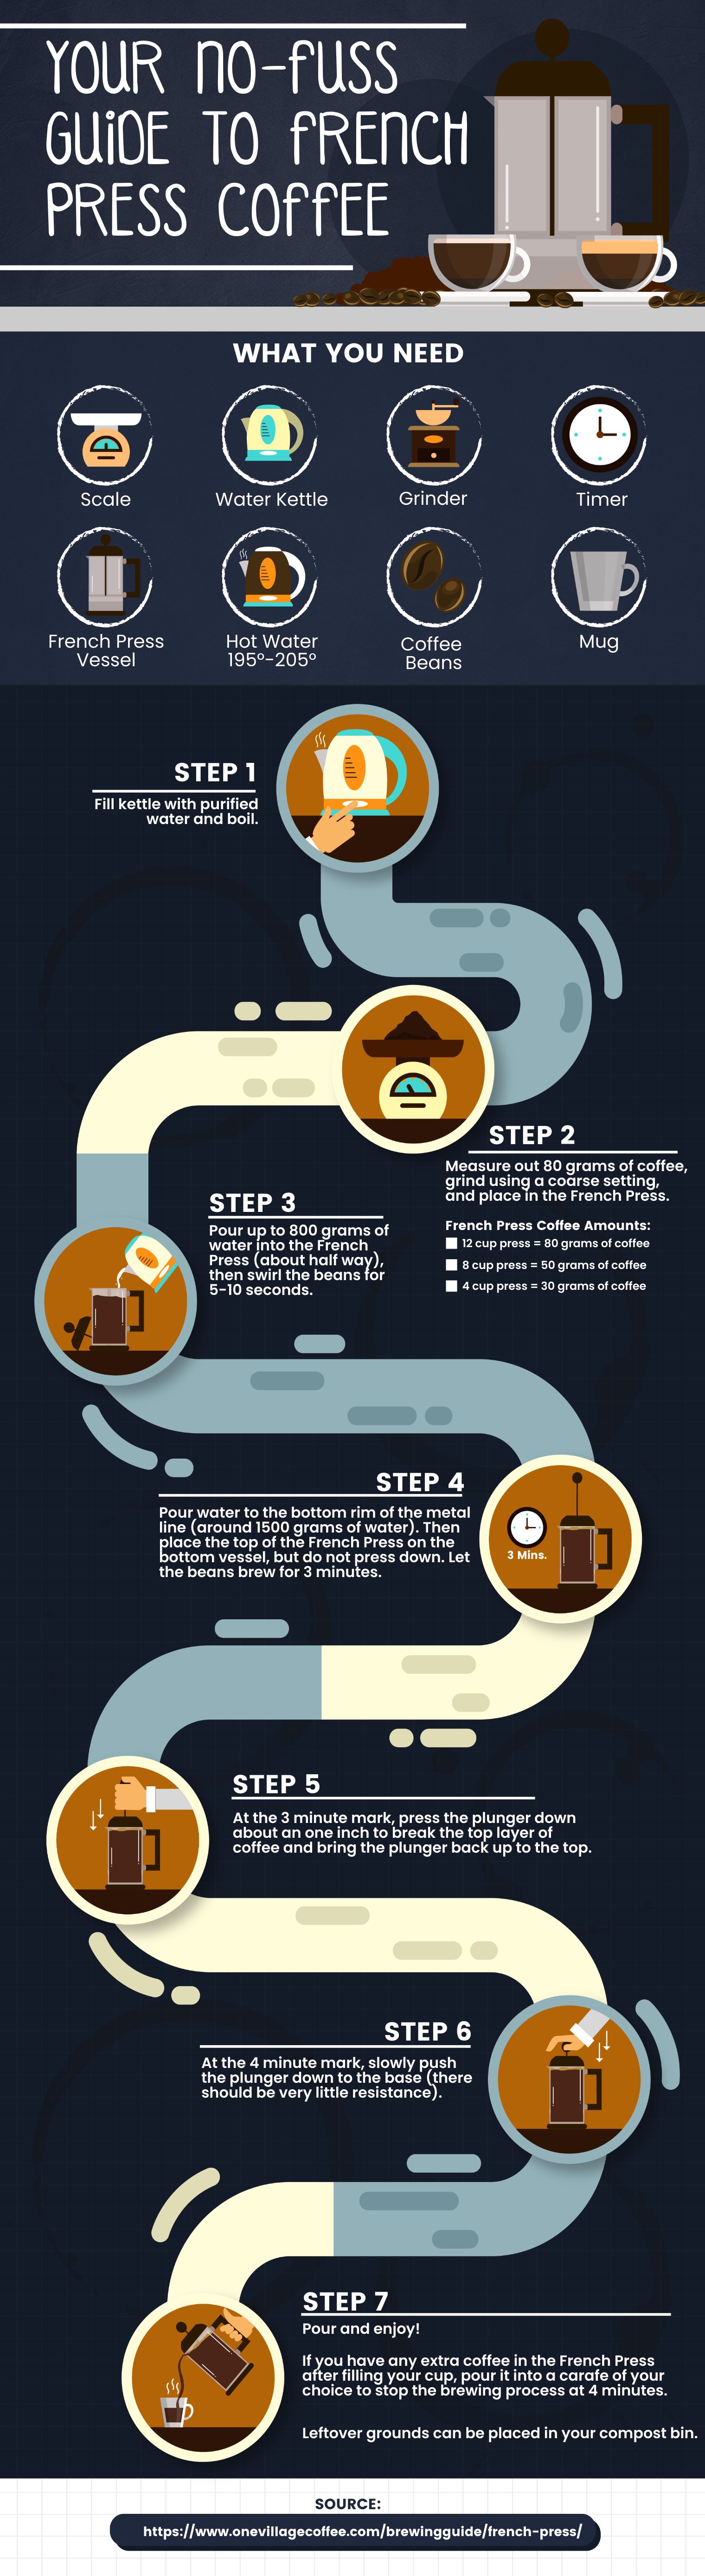 workflow process infographic